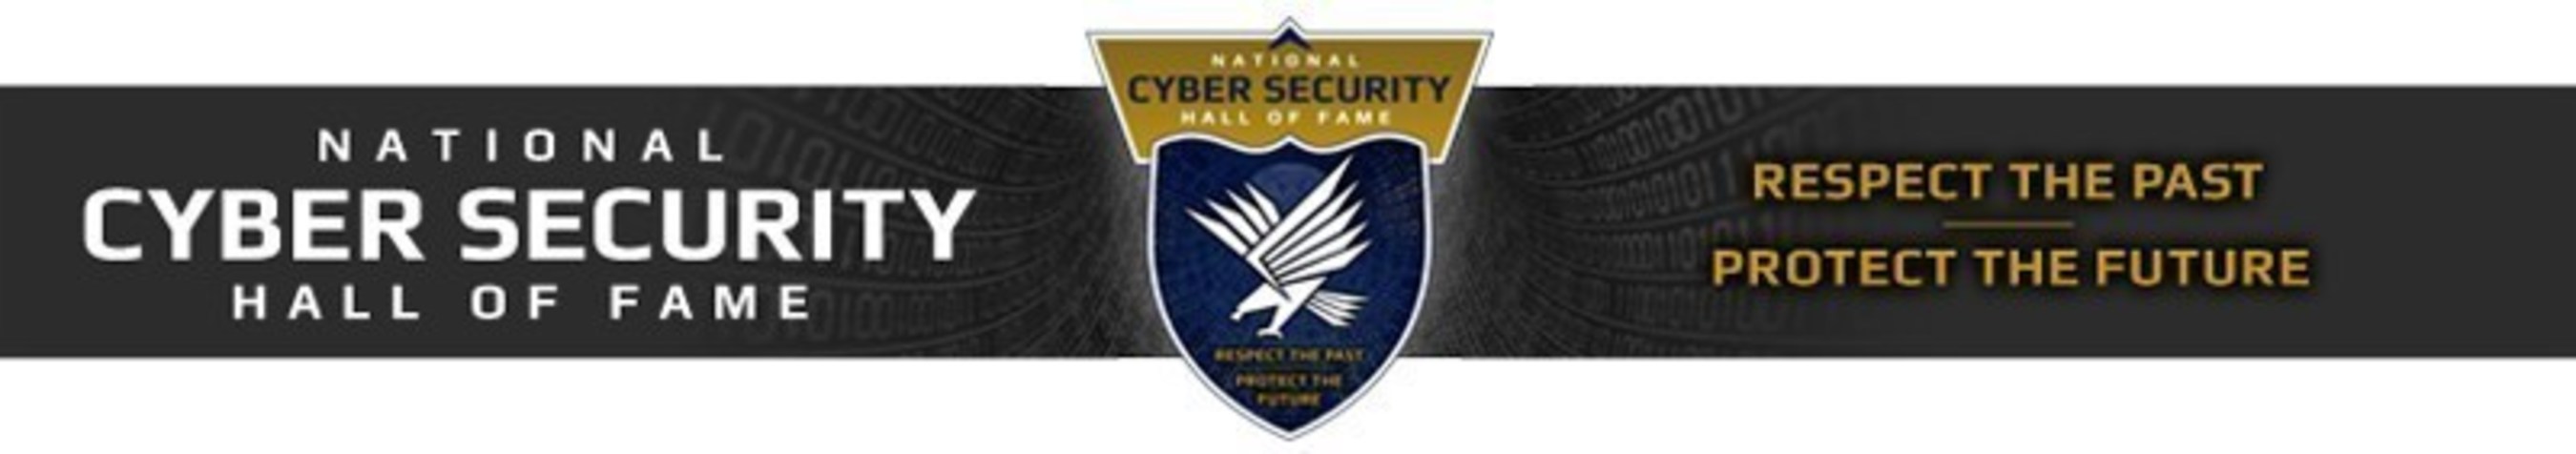 National Cyber Security Hall of Fame